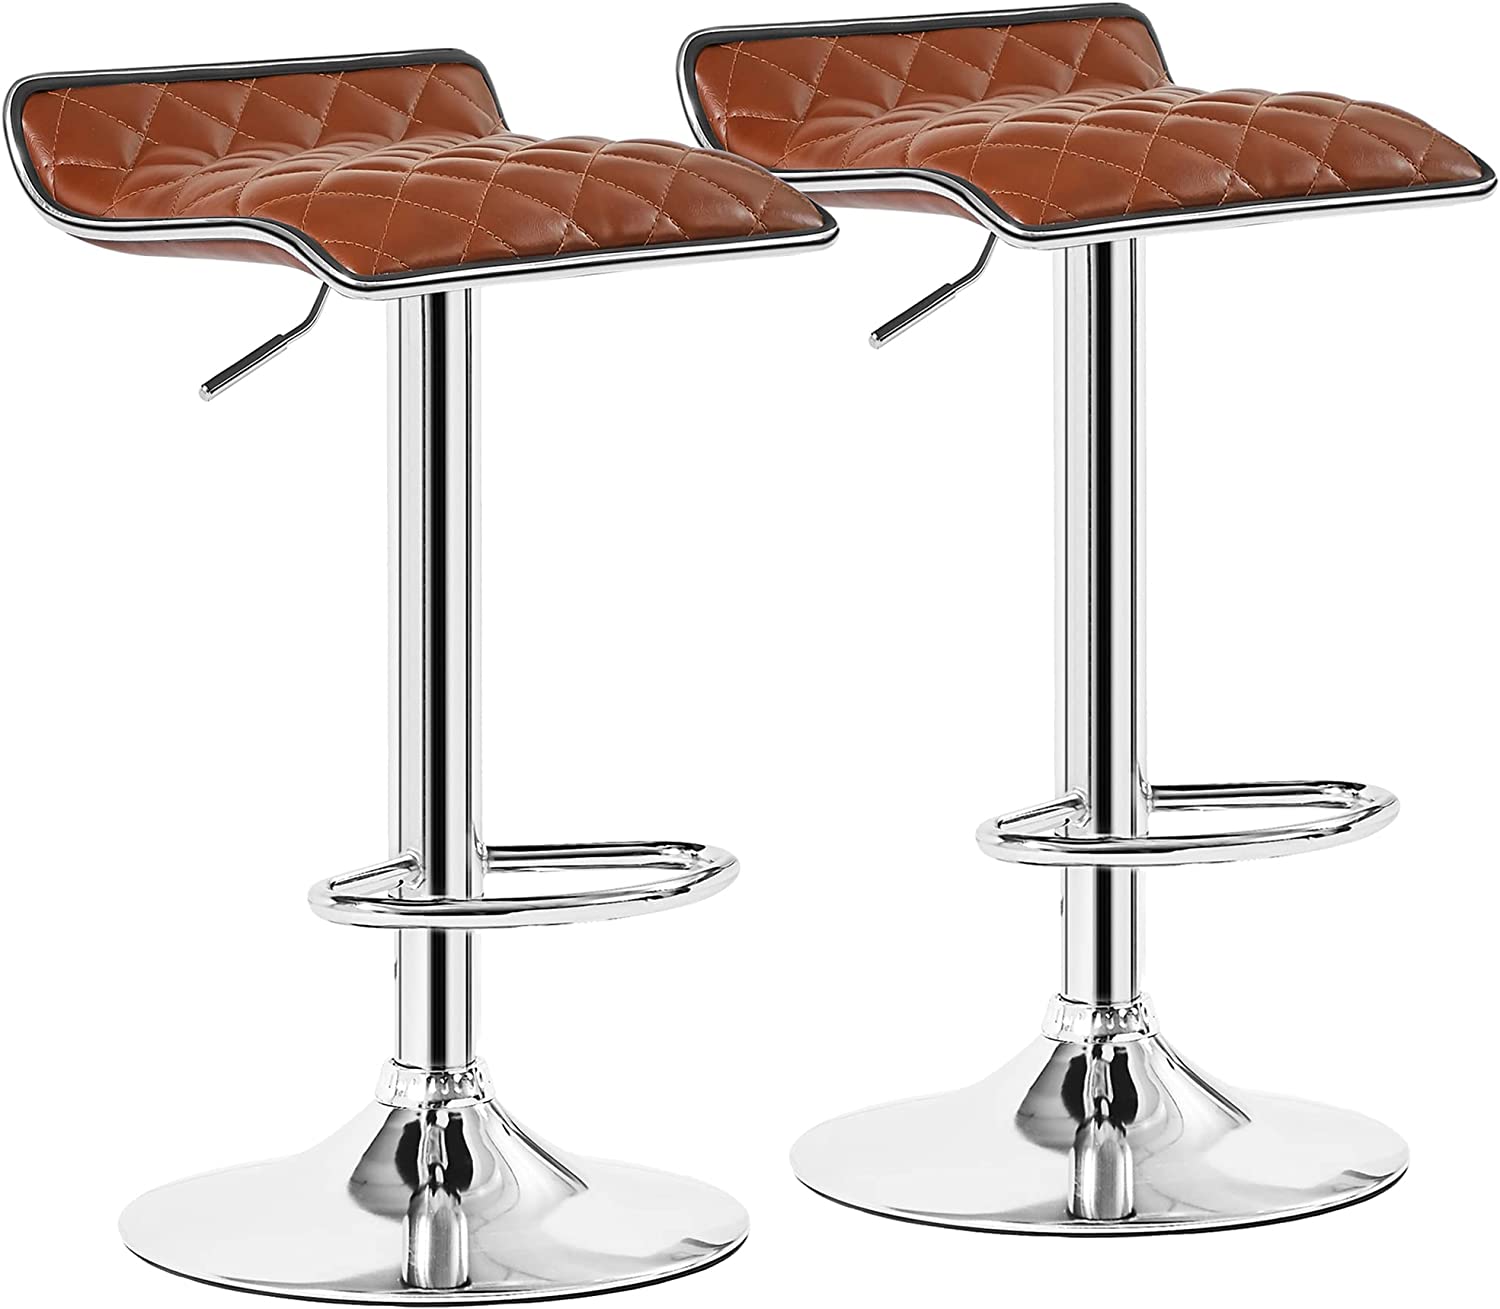 VECELO Bar Stools Set of 2, Kitchen Island Counter Height Chairs